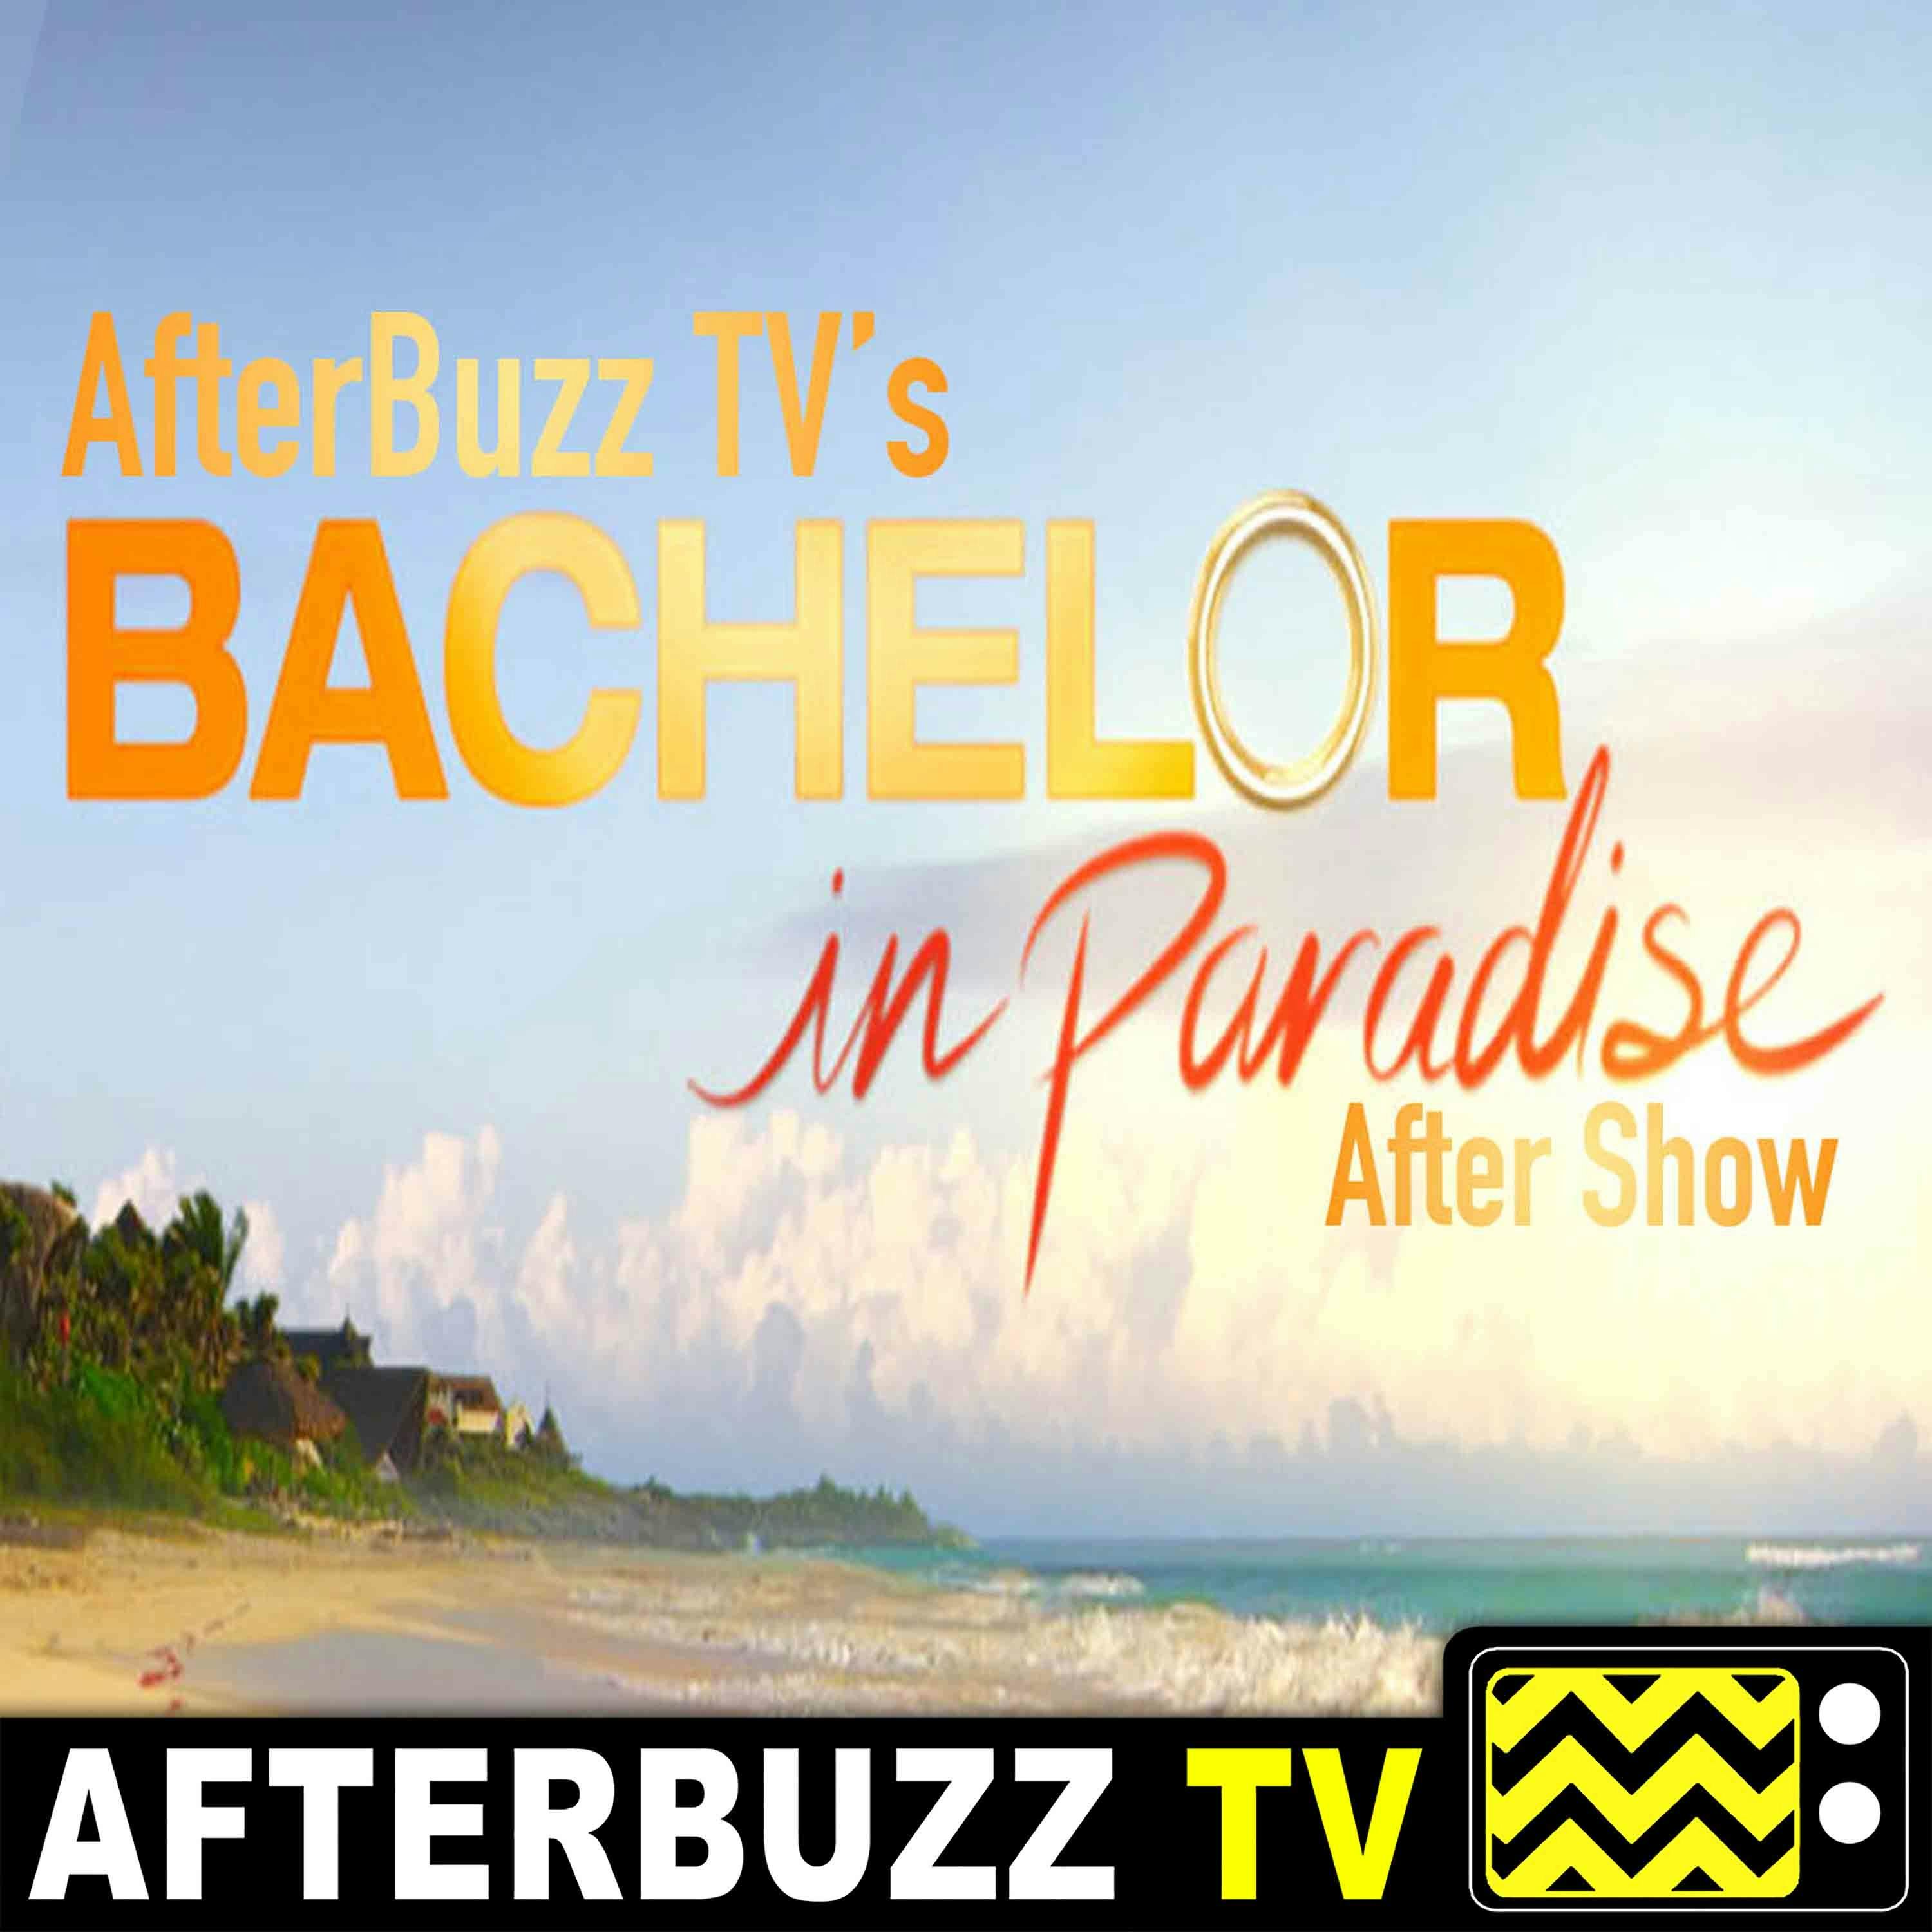 Bachelor In Paradise S:5 | Episodes 6 and 7 | AfterBuzz TV AfterShow